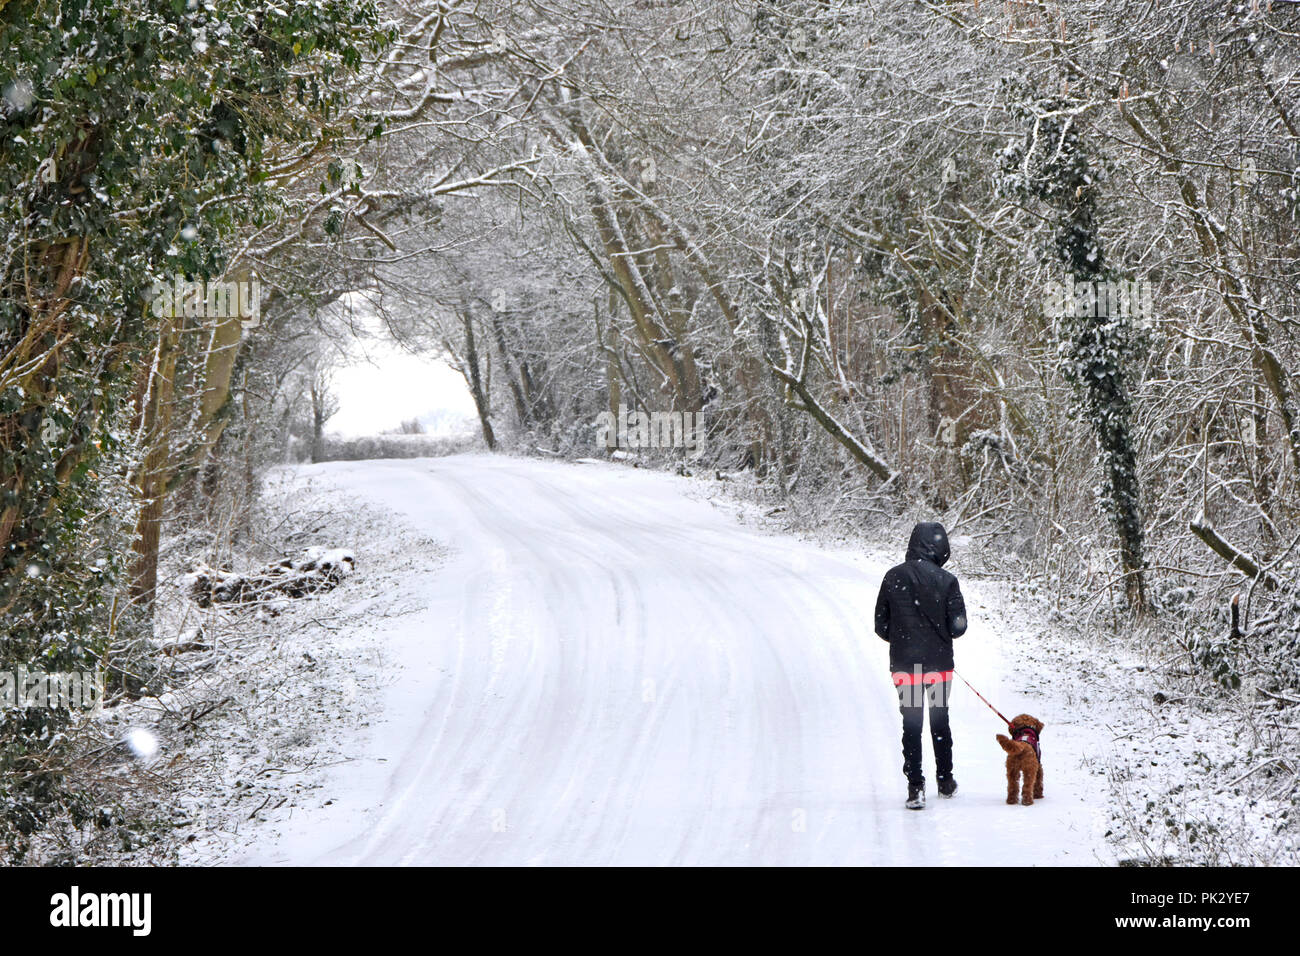 Light snow falling on road & teenage girl walking pet dog on lead snow covered scene country lane in snowy woodland trees Essex countryside England UK Stock Photo